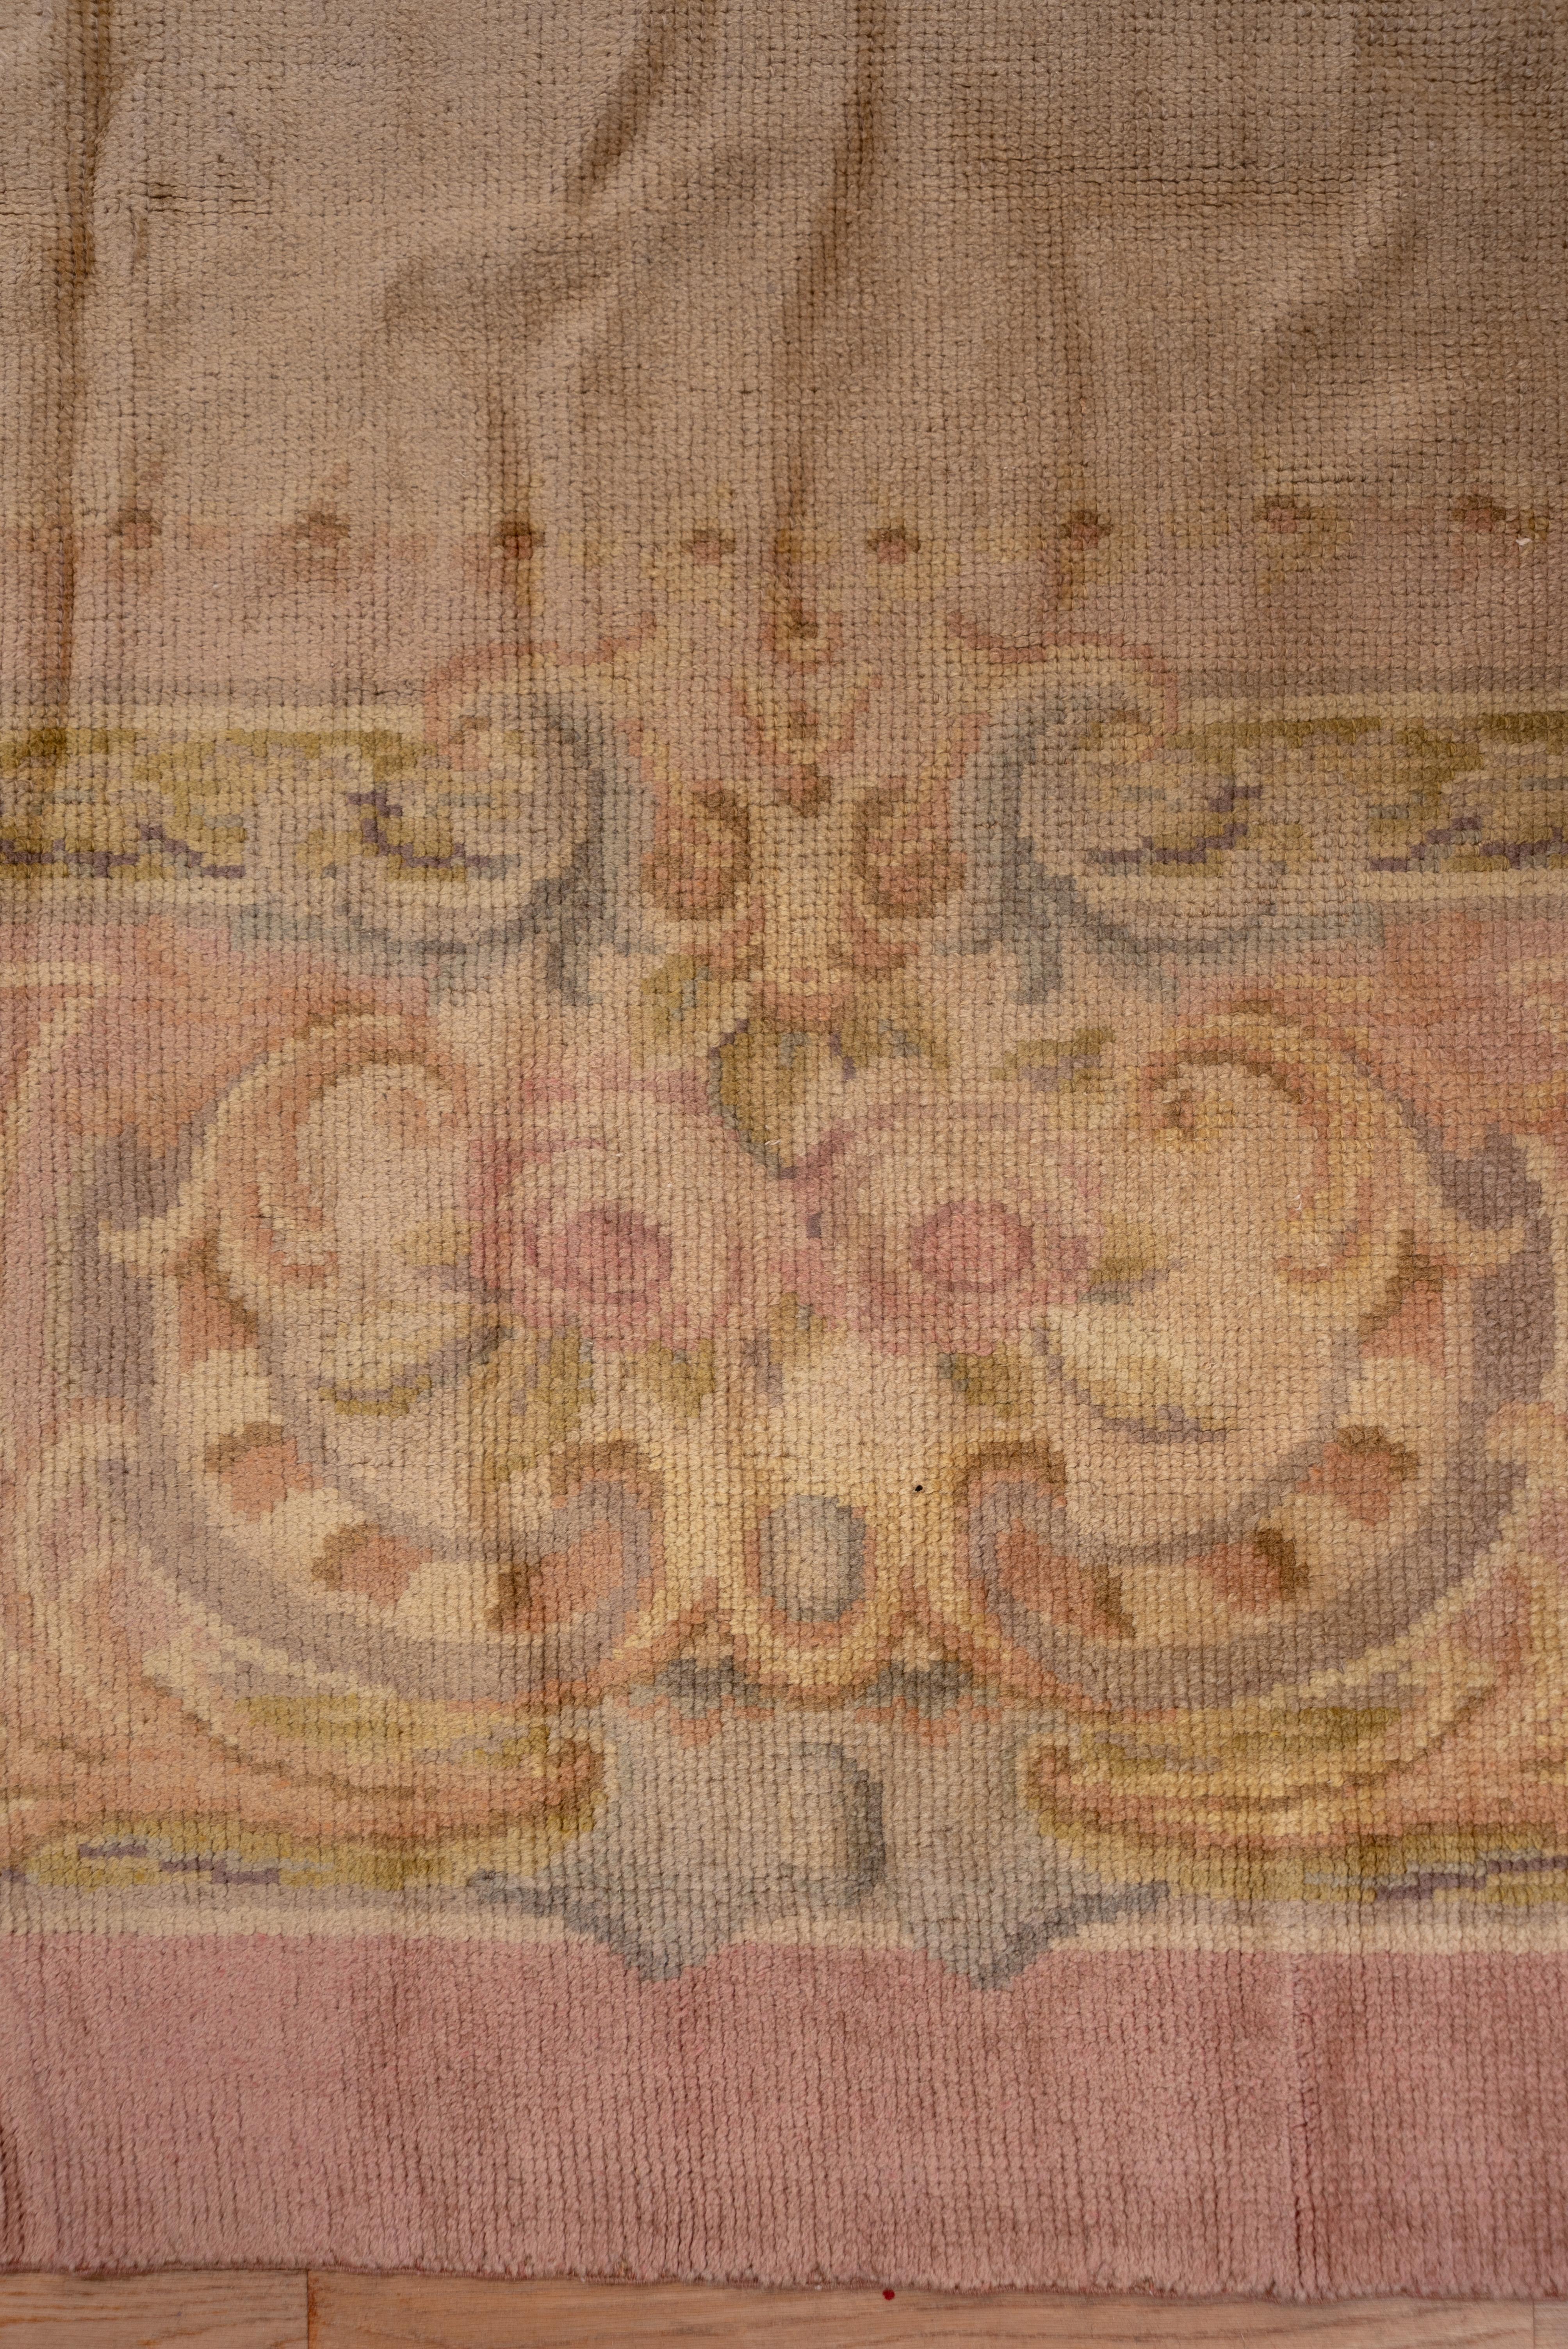 Hand-Woven Antique French Savonnerie Mansion Carpet, Rococo Style, circa 1910s For Sale